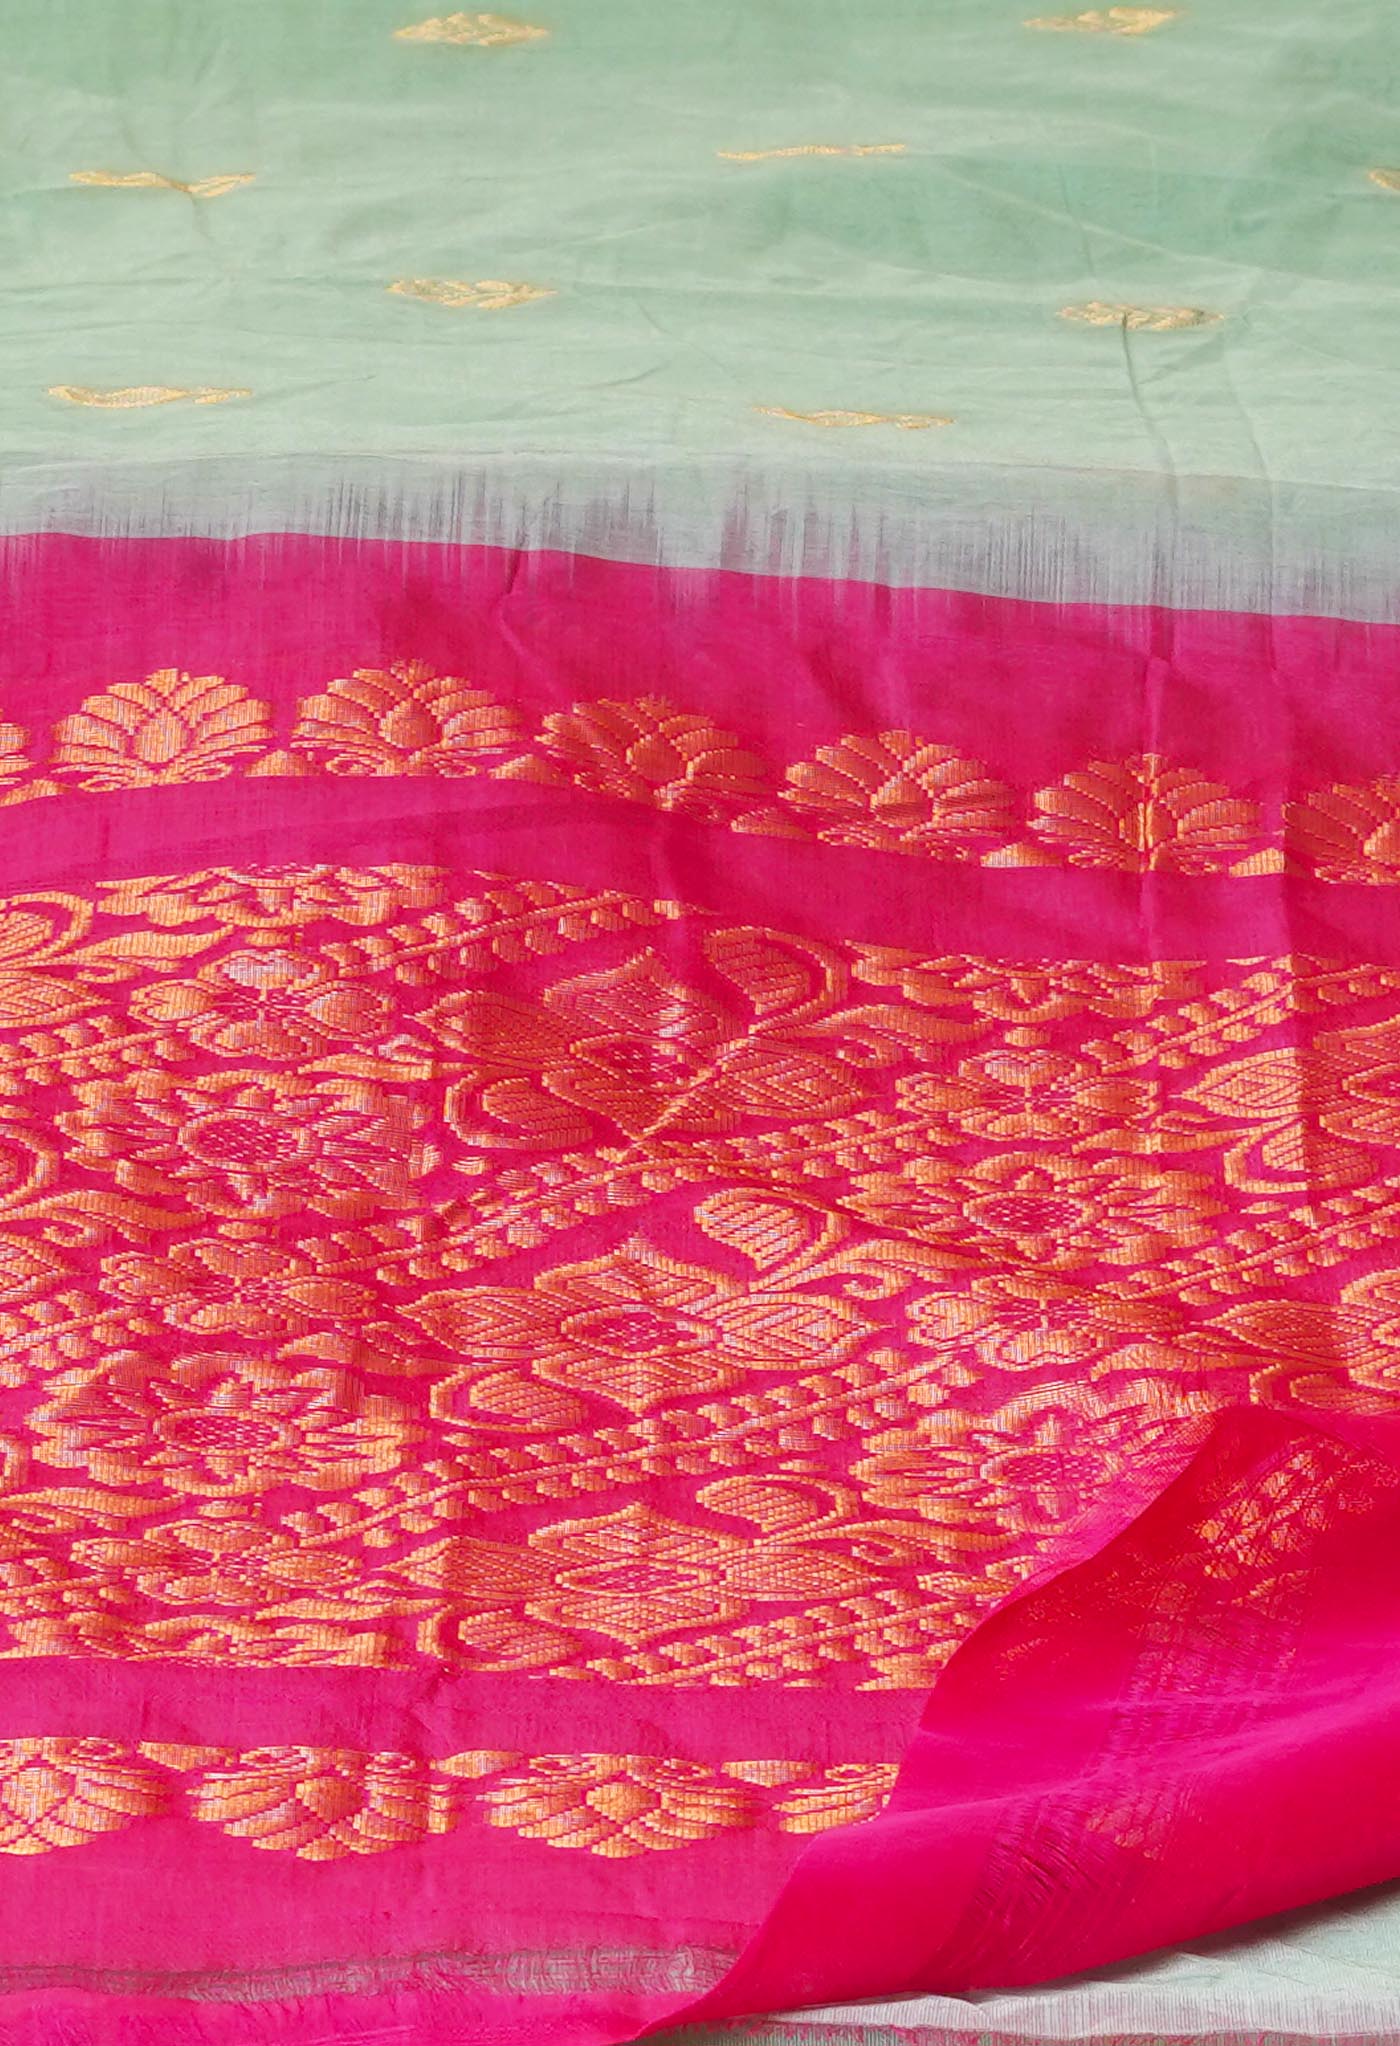 Green Pure Handcrafted Gadwal cotton Saree